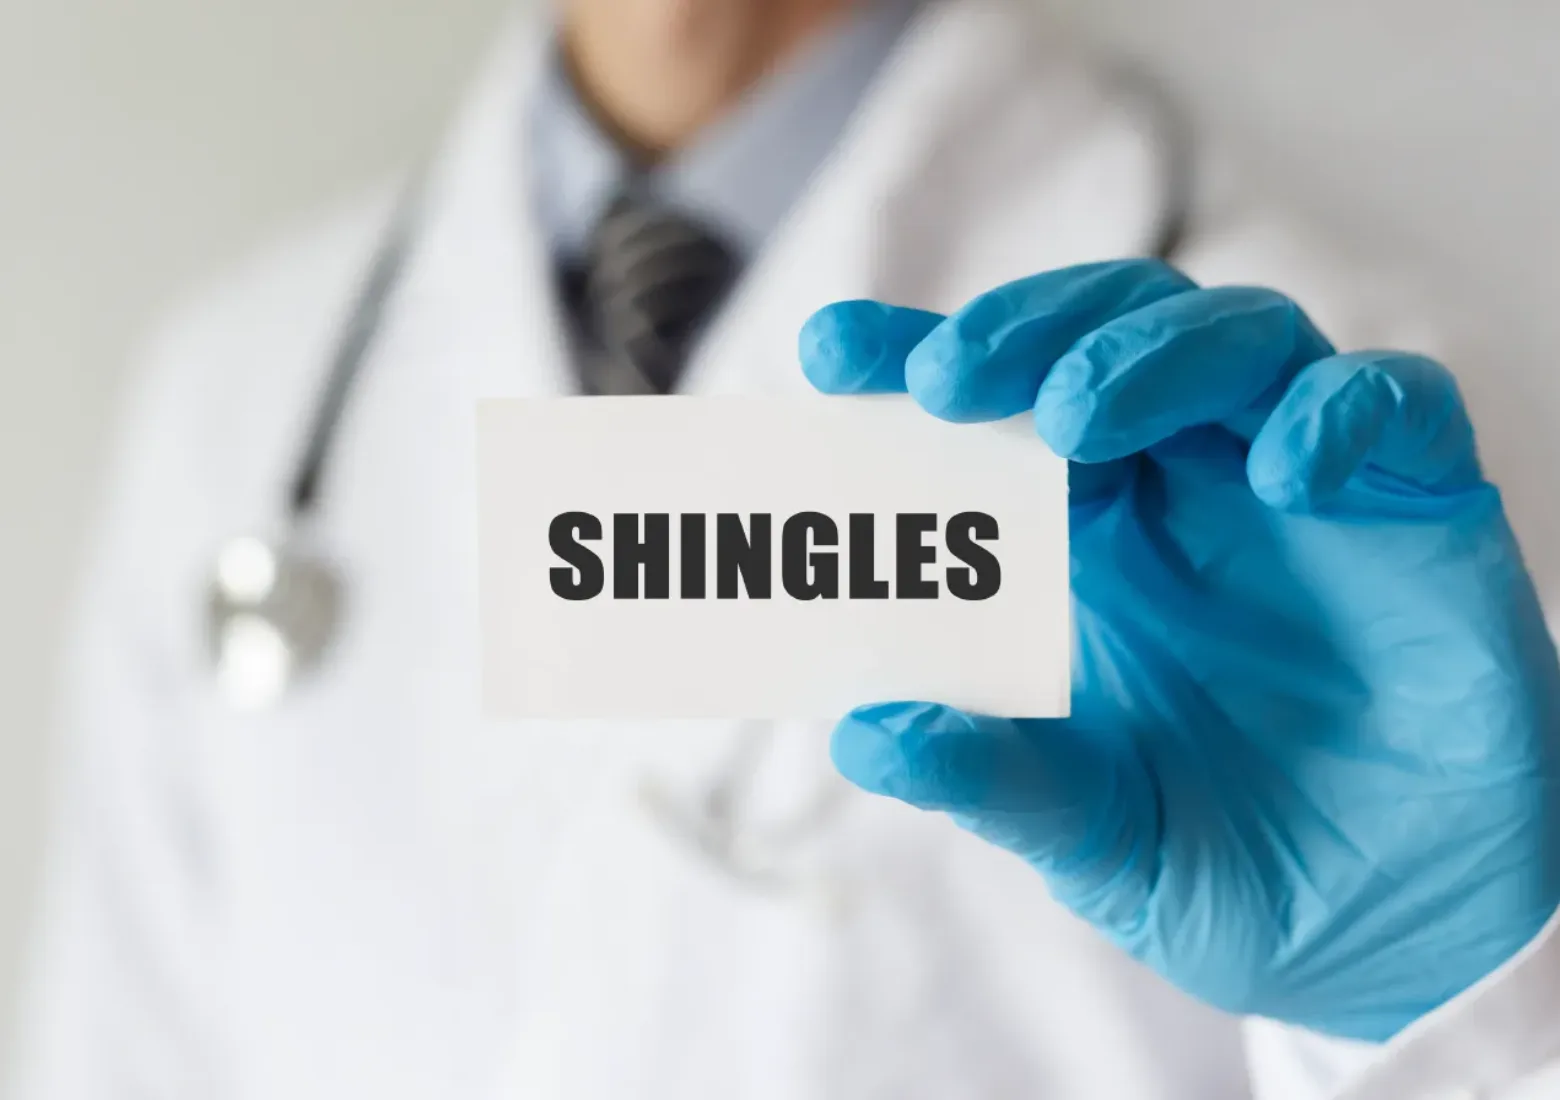 Learn more about how to prevent Shingles